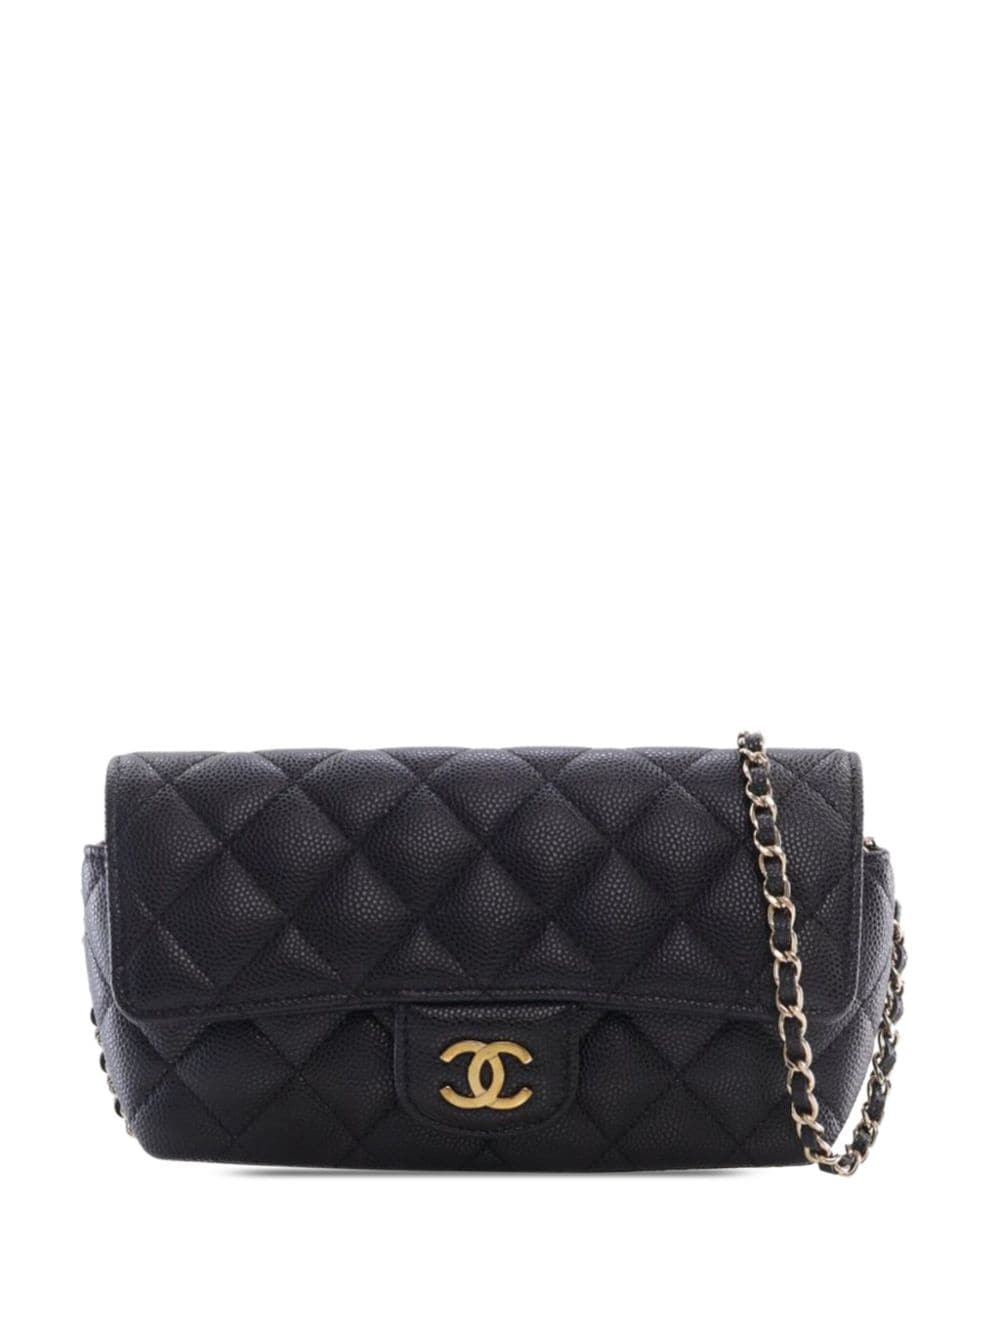 CHANEL Pre-Owned 2020 Quilted Caviar Sunglasses Case with Chain crossbody bag - Black